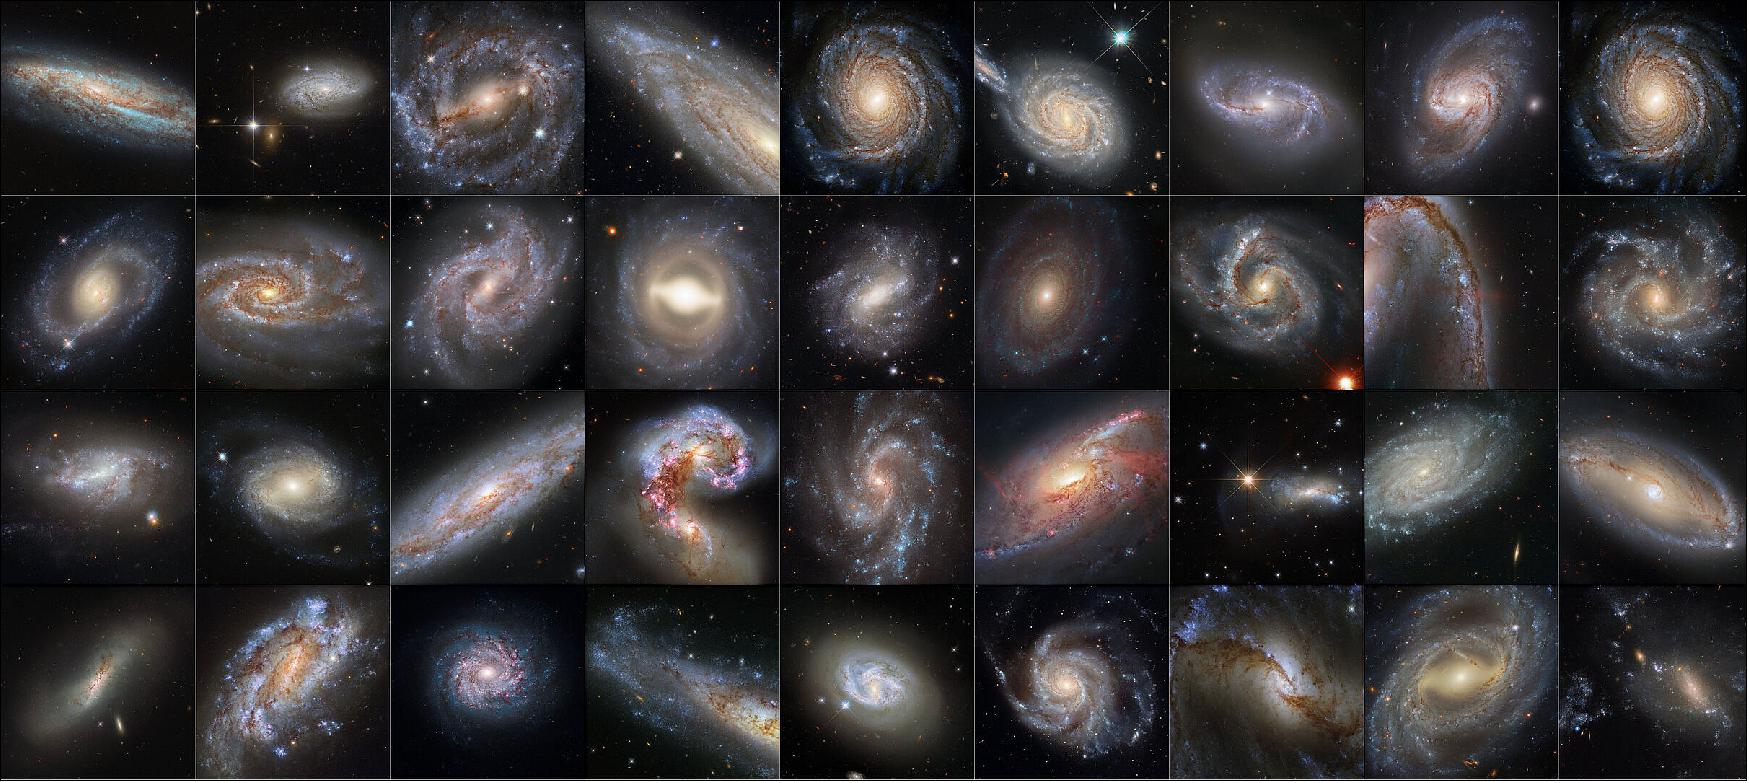 Figure 3: Each of the images in this special collection features a spiral galaxy that hosts both Cepheid variables and a special class of supernovae, two remarkable stellar phenomena that on the face of it do not have much in common: Cepheid variables are pulsating stars that regularly brighten and dim and type Ia supernovae are the catastrophic explosions that mark the death throes of a hot, dense white dwarf star. However, both can be used by astronomers to measure the distance to an astronomical object (image credit: NASA, ESA; CC BY 4.0, STScI)